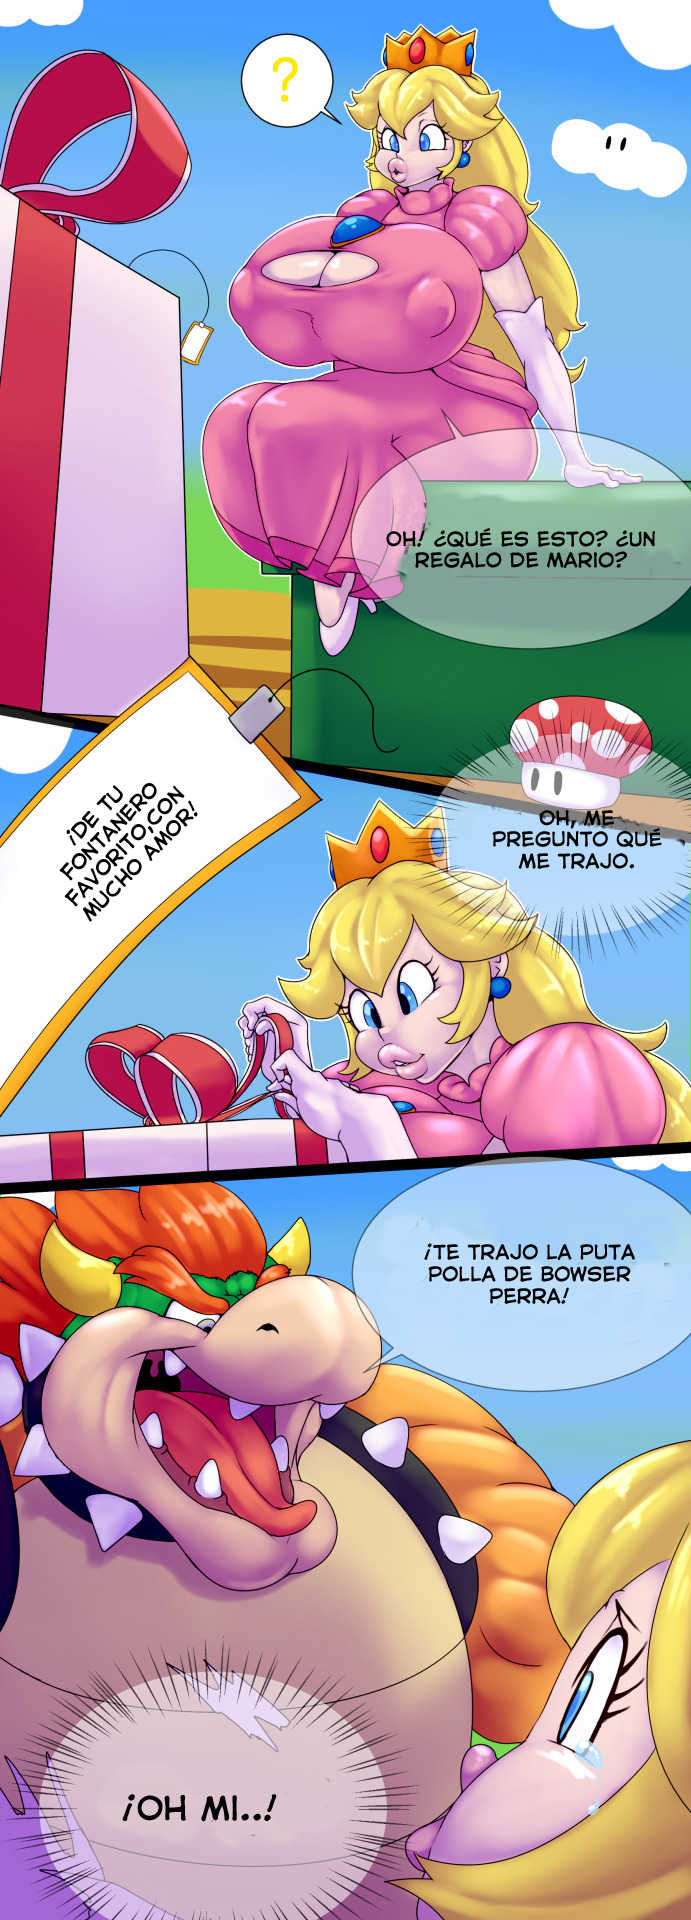 [Ber00] The Gift  [Spanish] - Page 1